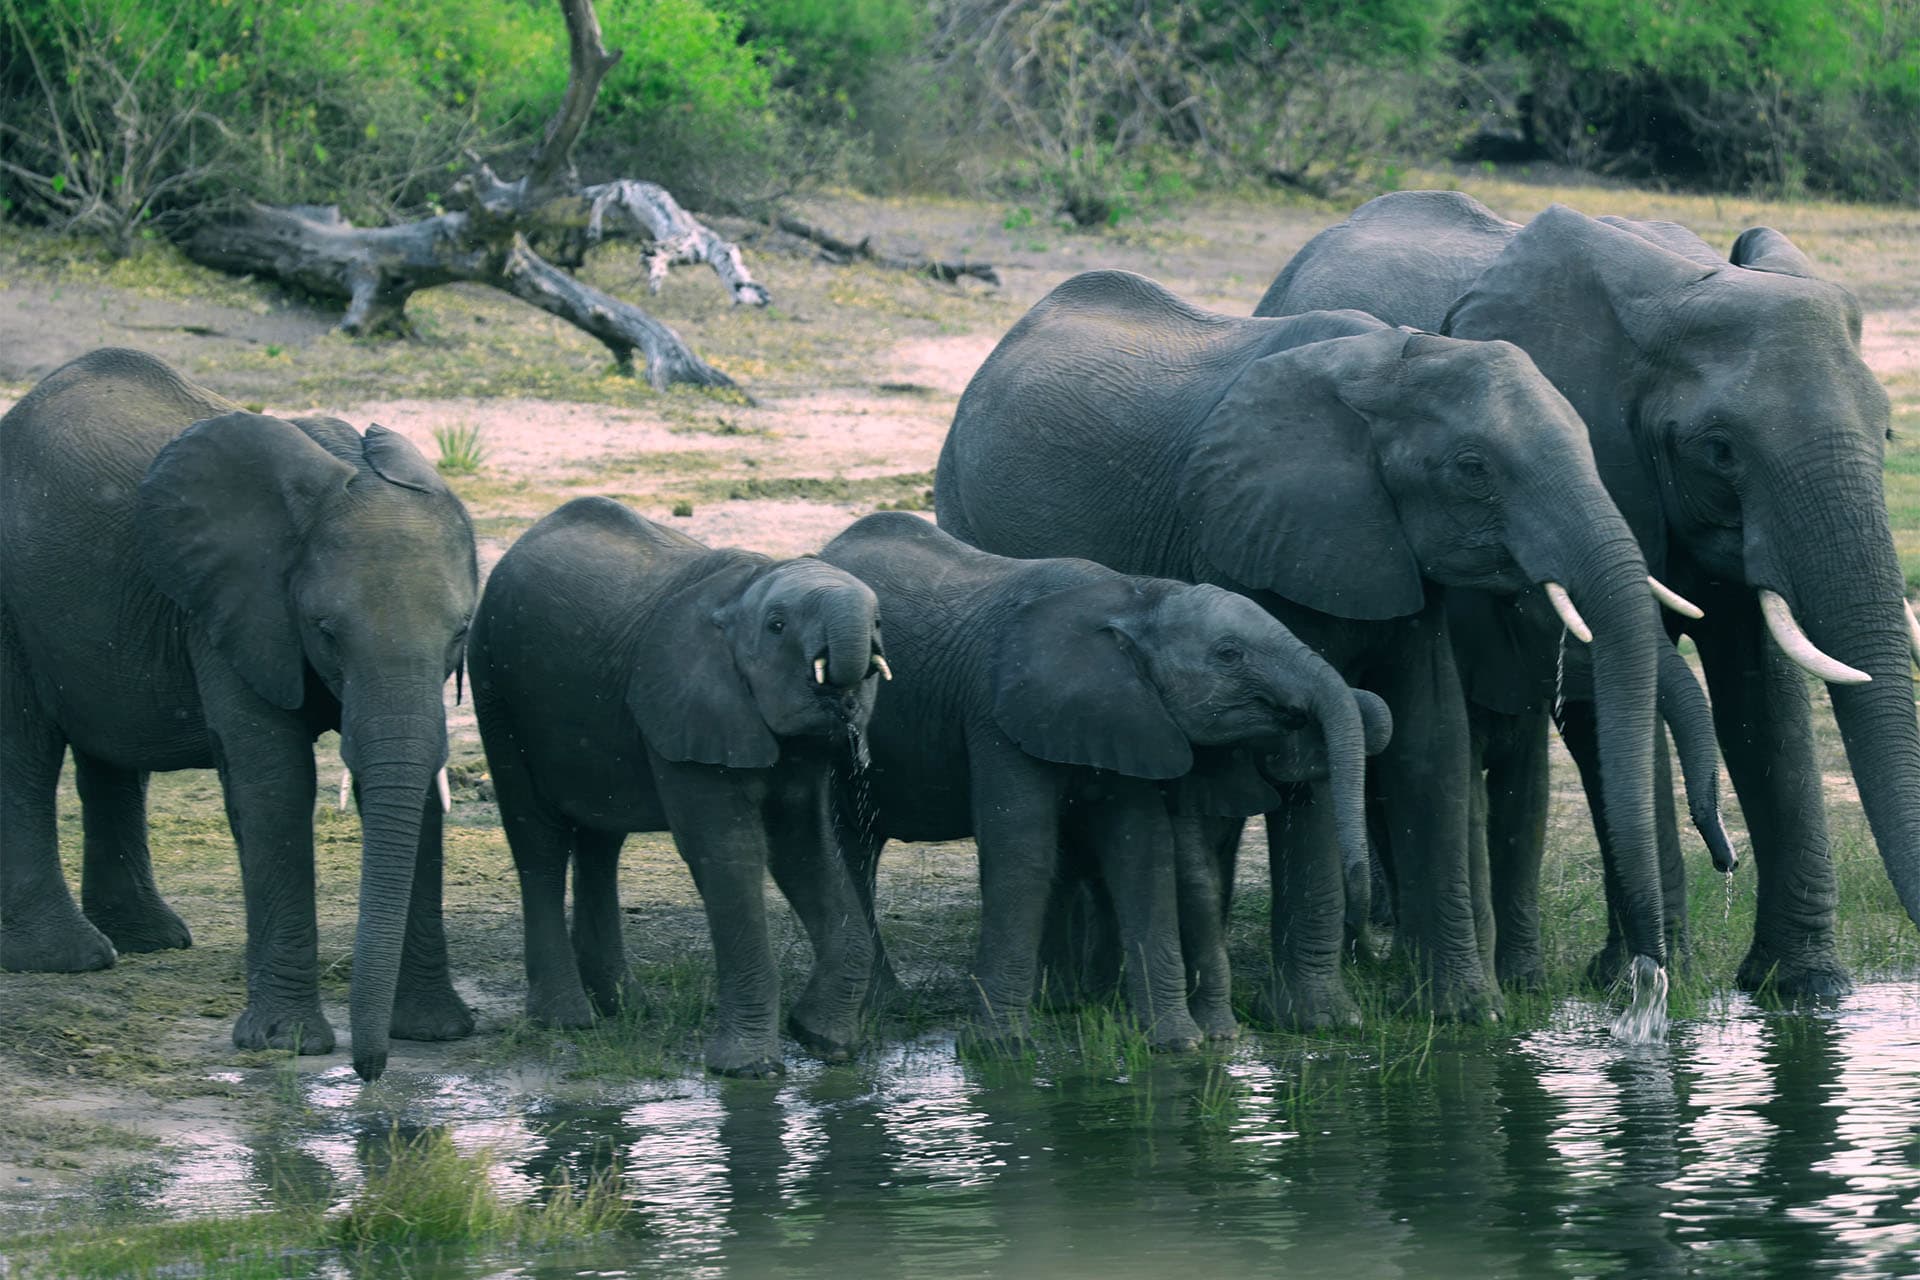 Group of elephants in Africa during a tour by Mufambi